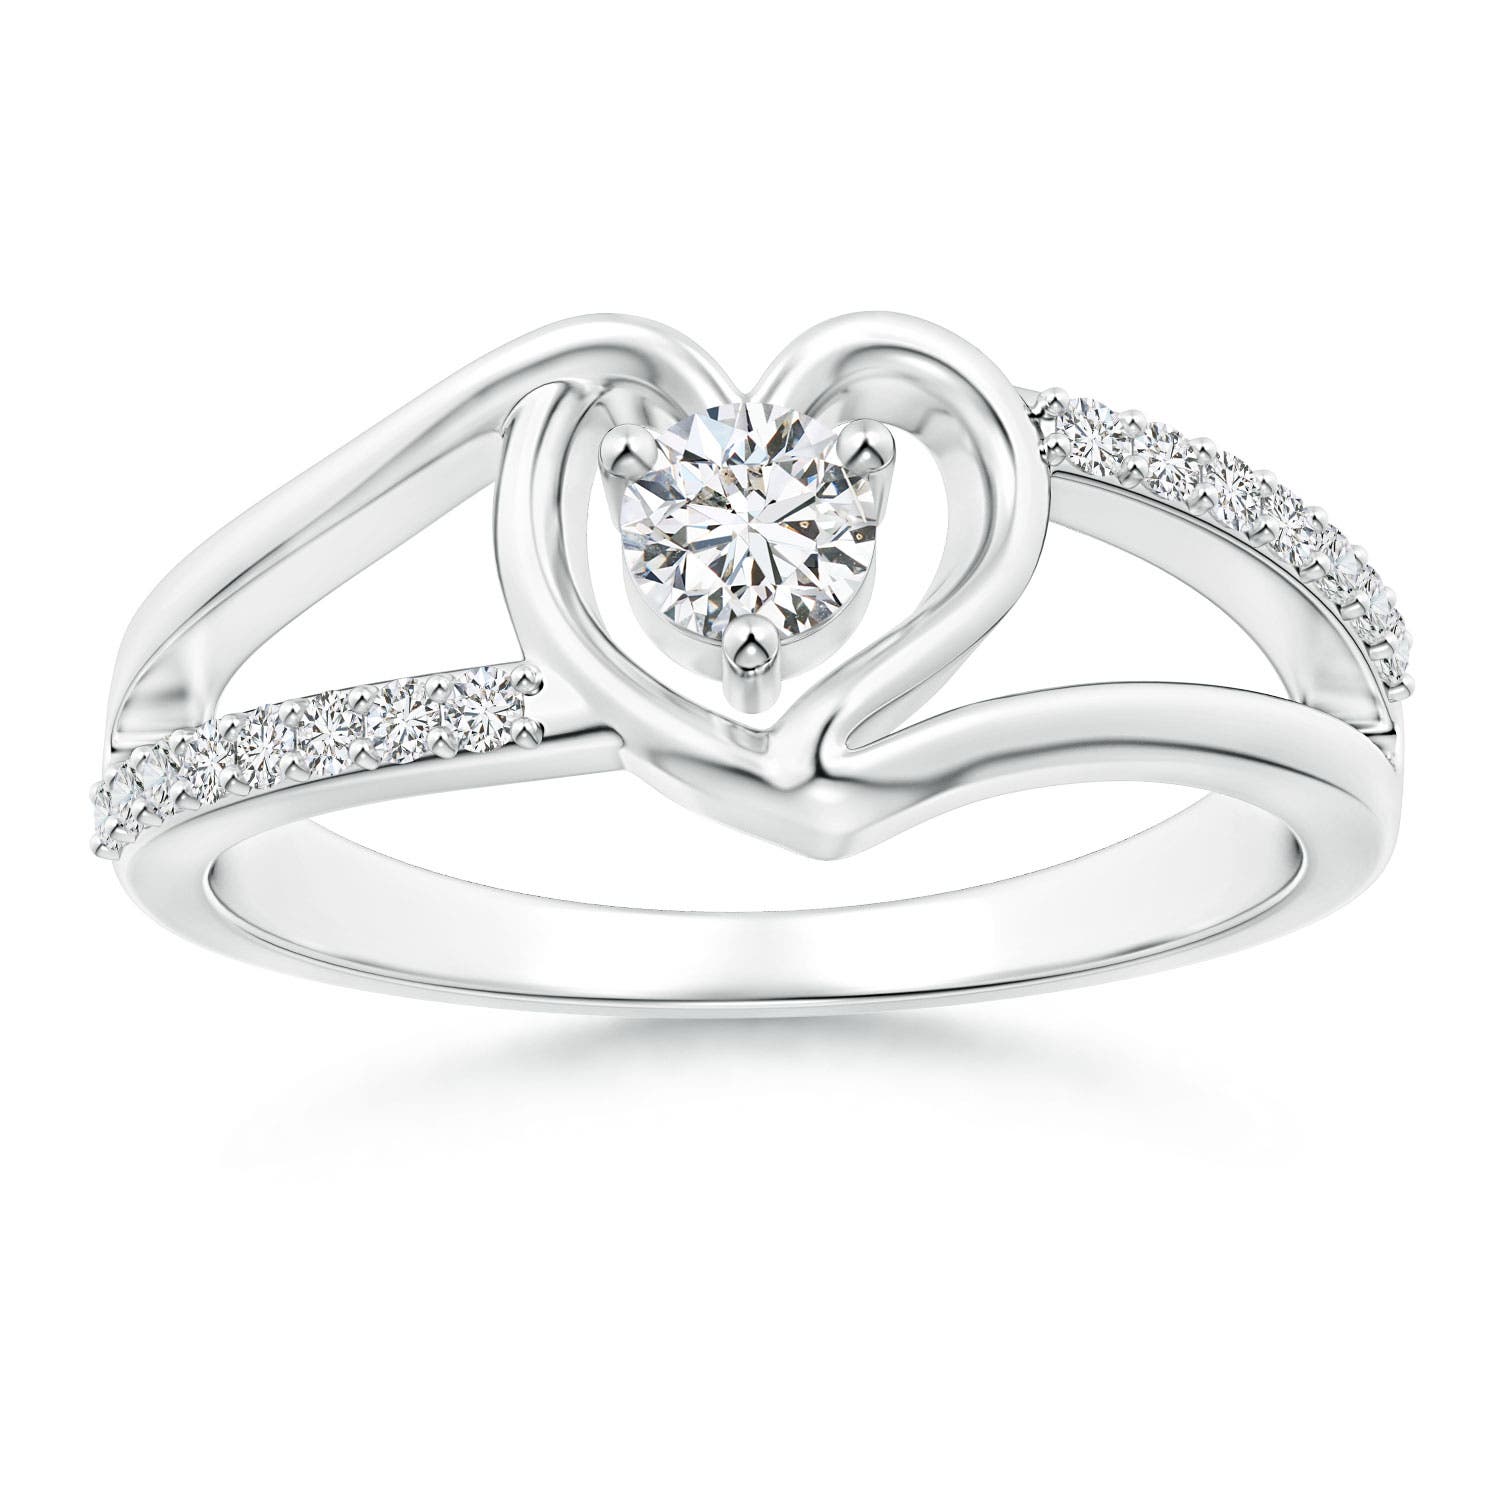 H, SI2 / 0.35 CT / 14 KT White Gold